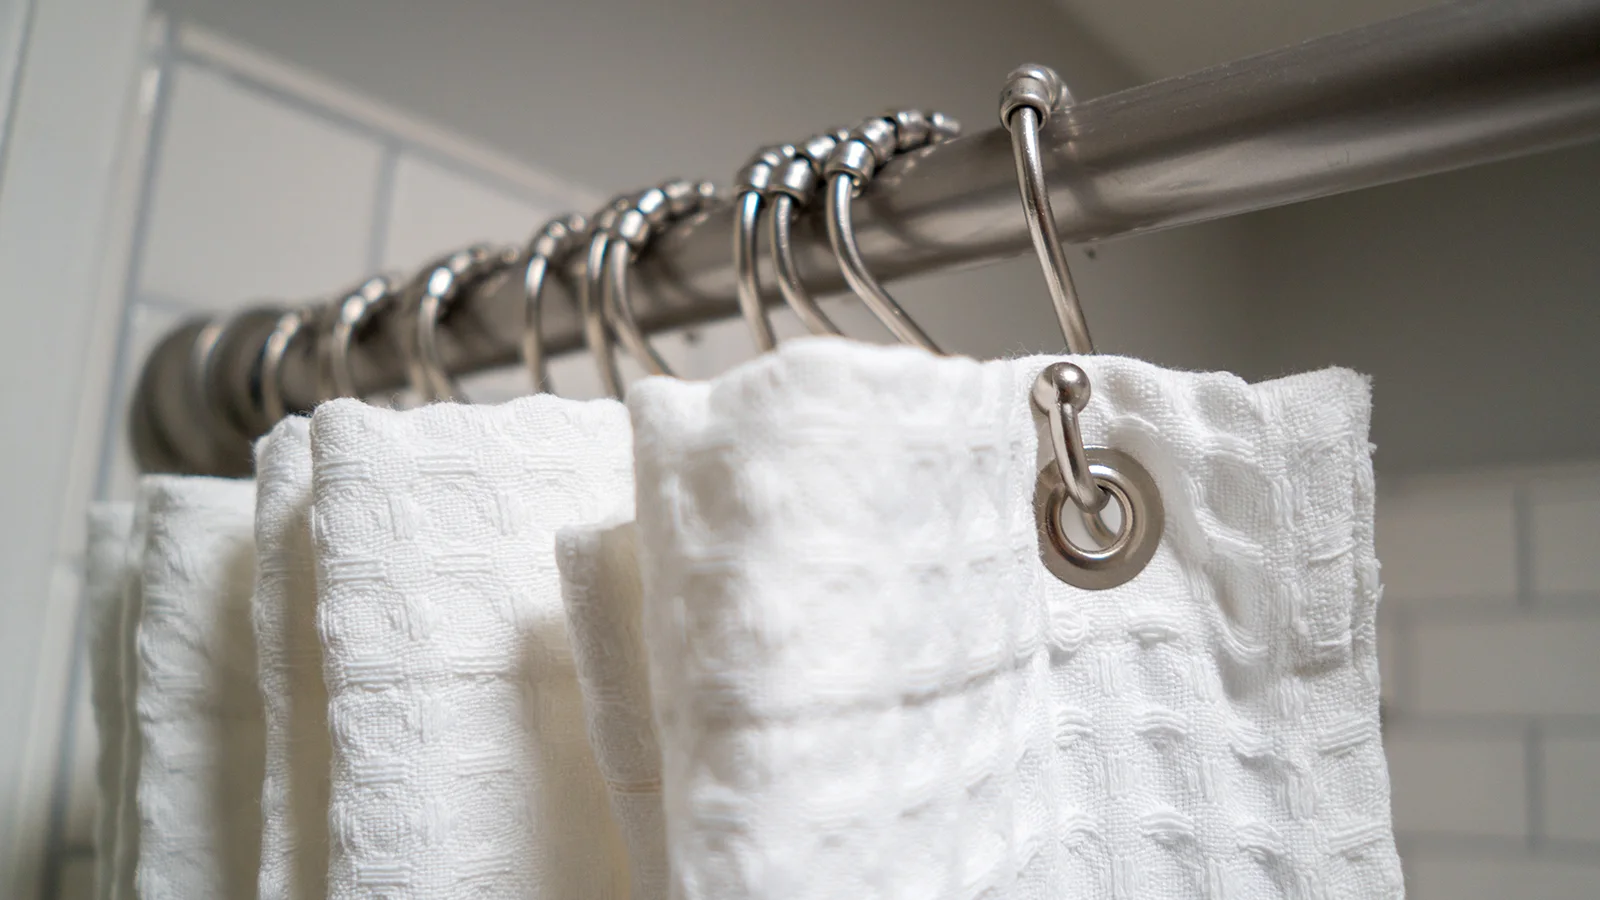 A white towel hangs on a metal rod in a bathroom, alongside a closed shower curtain which show how to keep shower curtain closed.